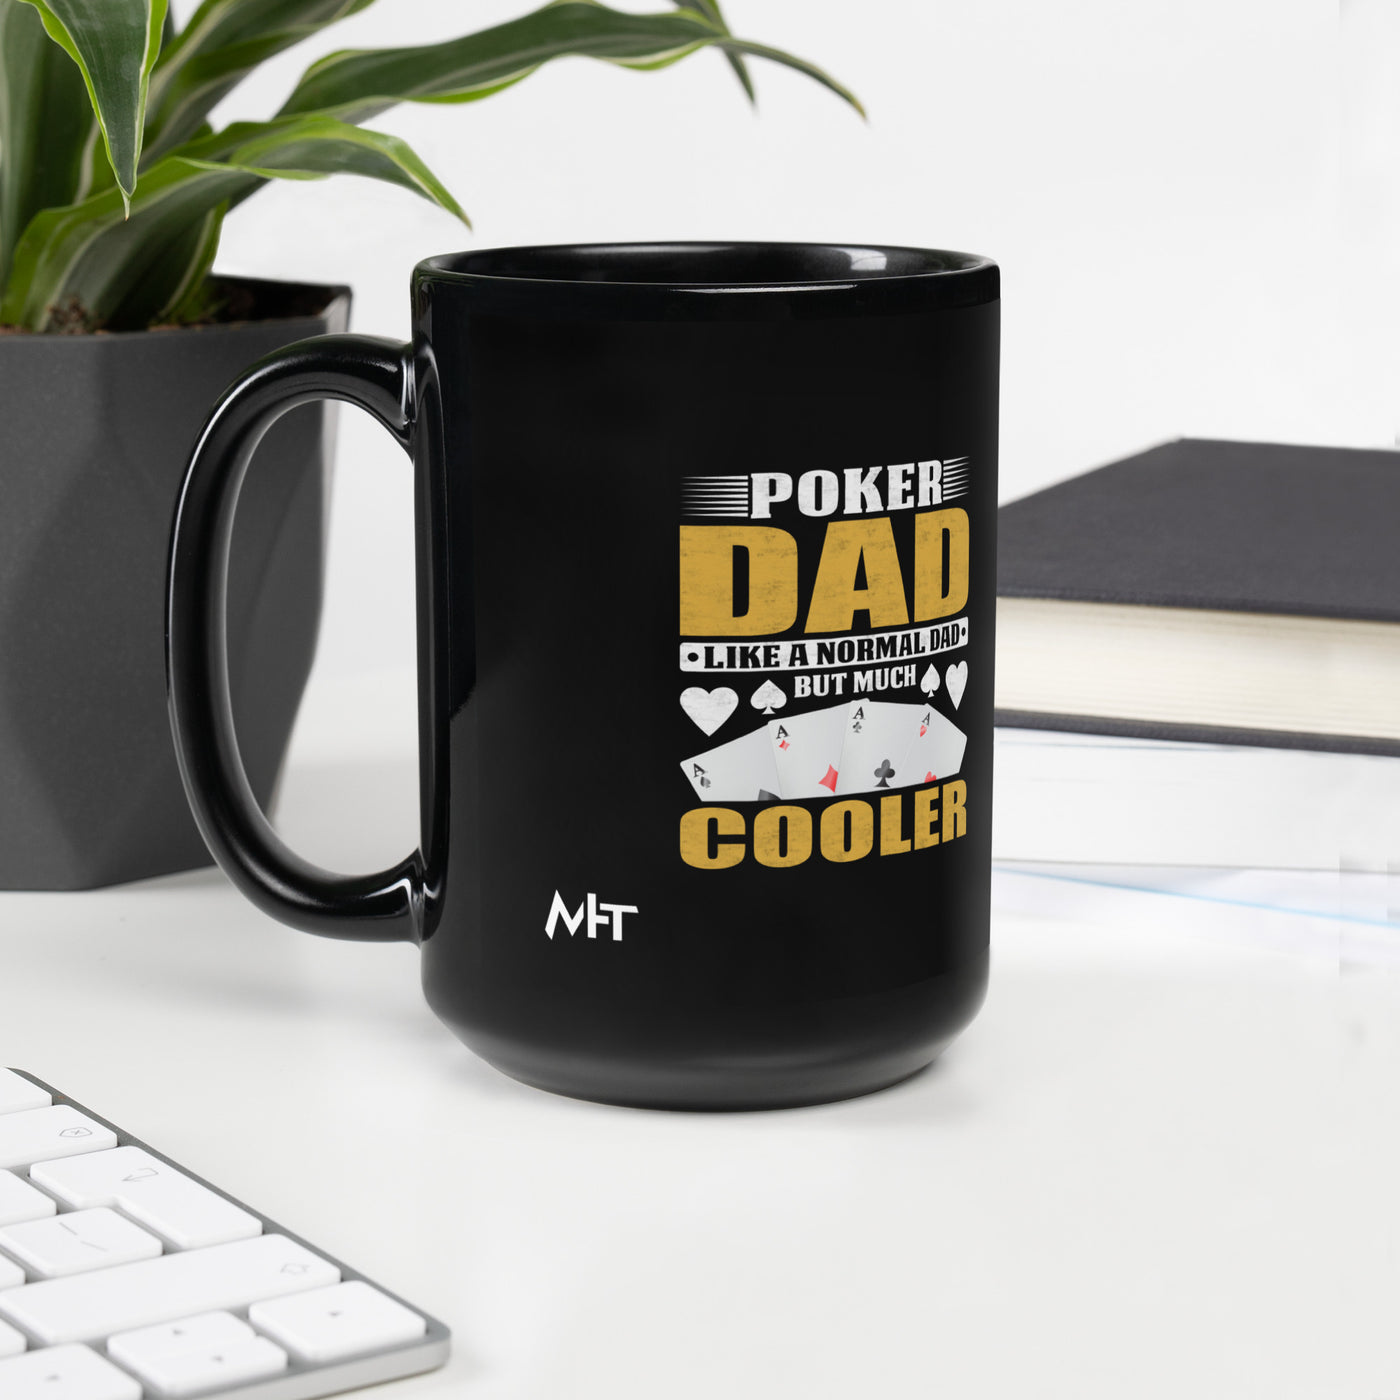 Poker Dad is like a Normal Dad but much Cooler - Black Glossy Mug